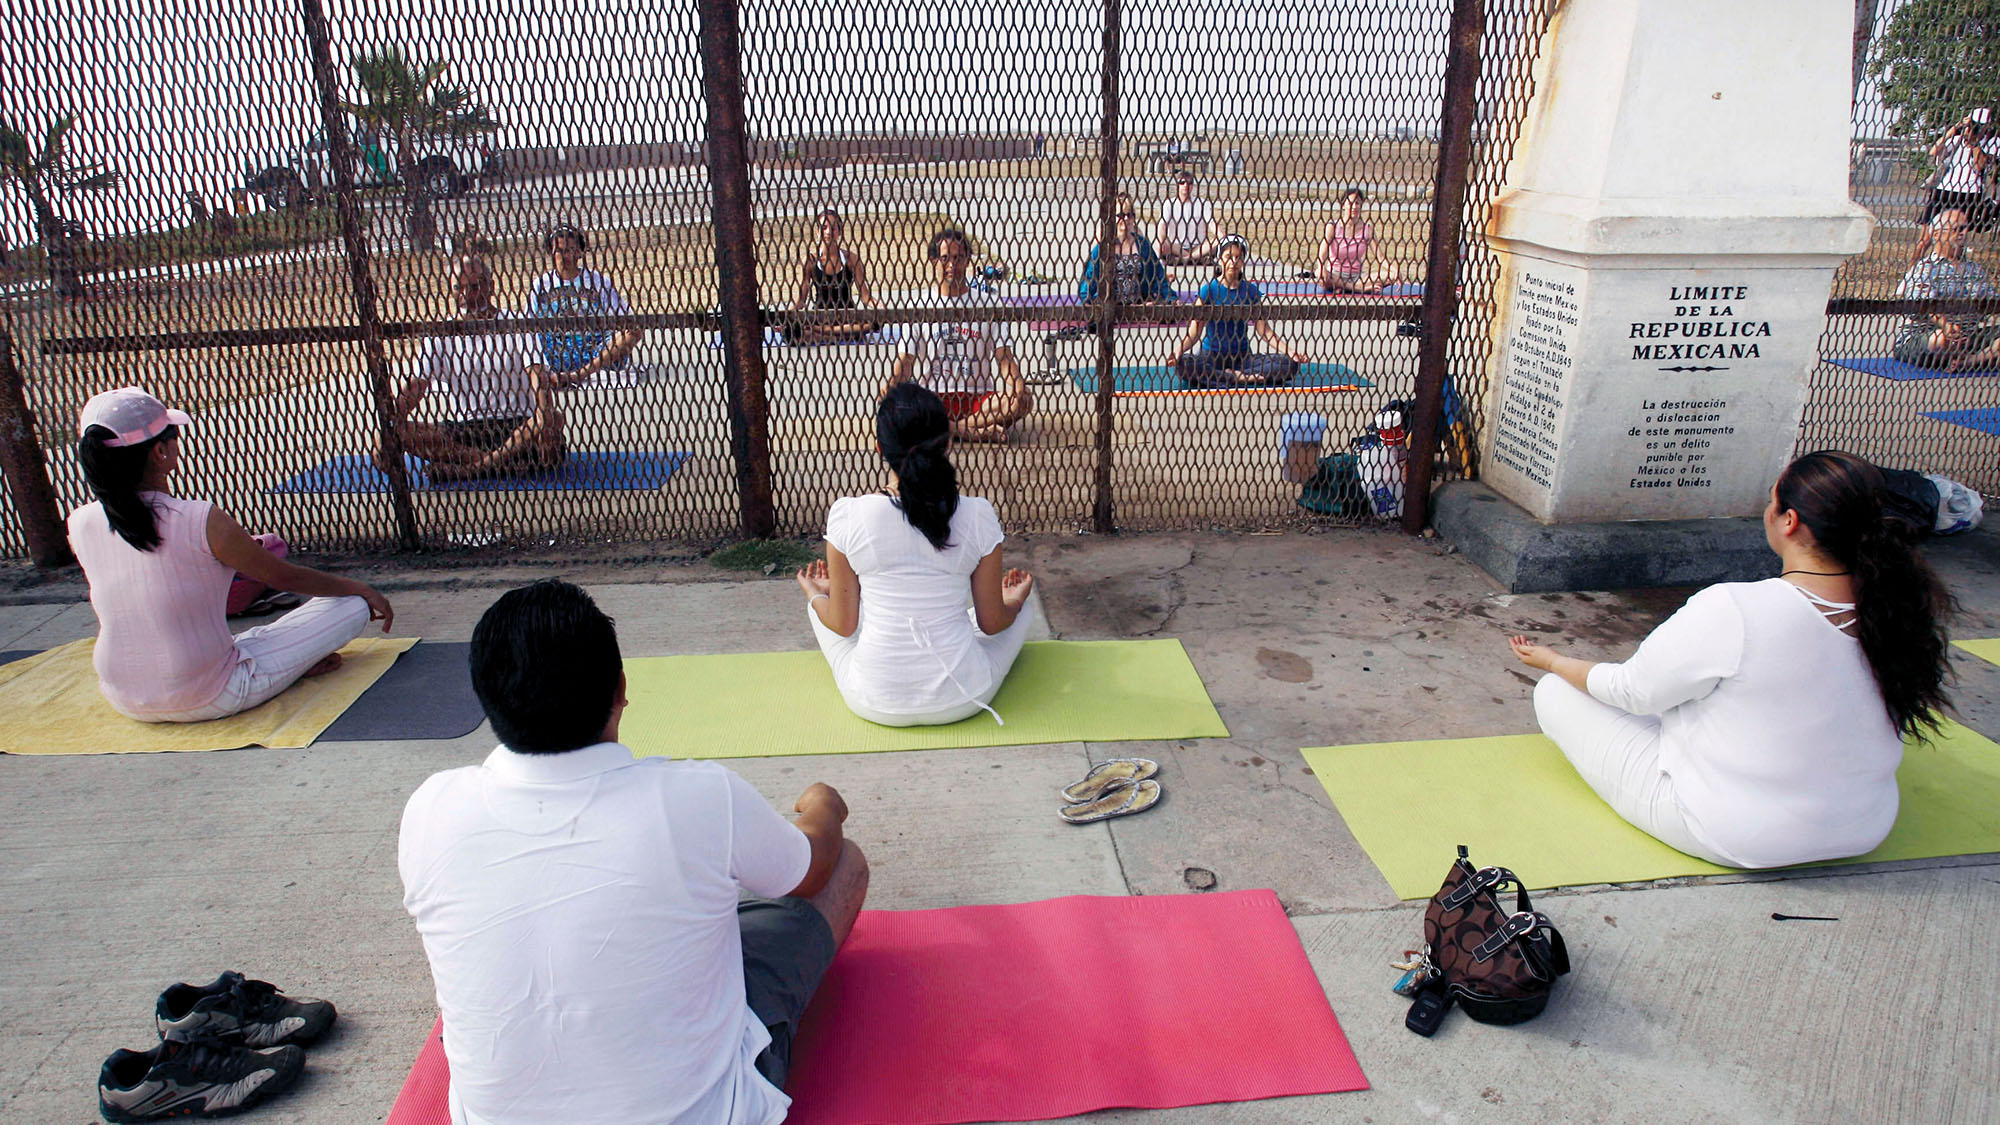 Practitioners of “yoga without borders” meet on opposite sides  of the Tijuana–San Diego border fence. (Photo by Guillermo Arias/Associated Press.)